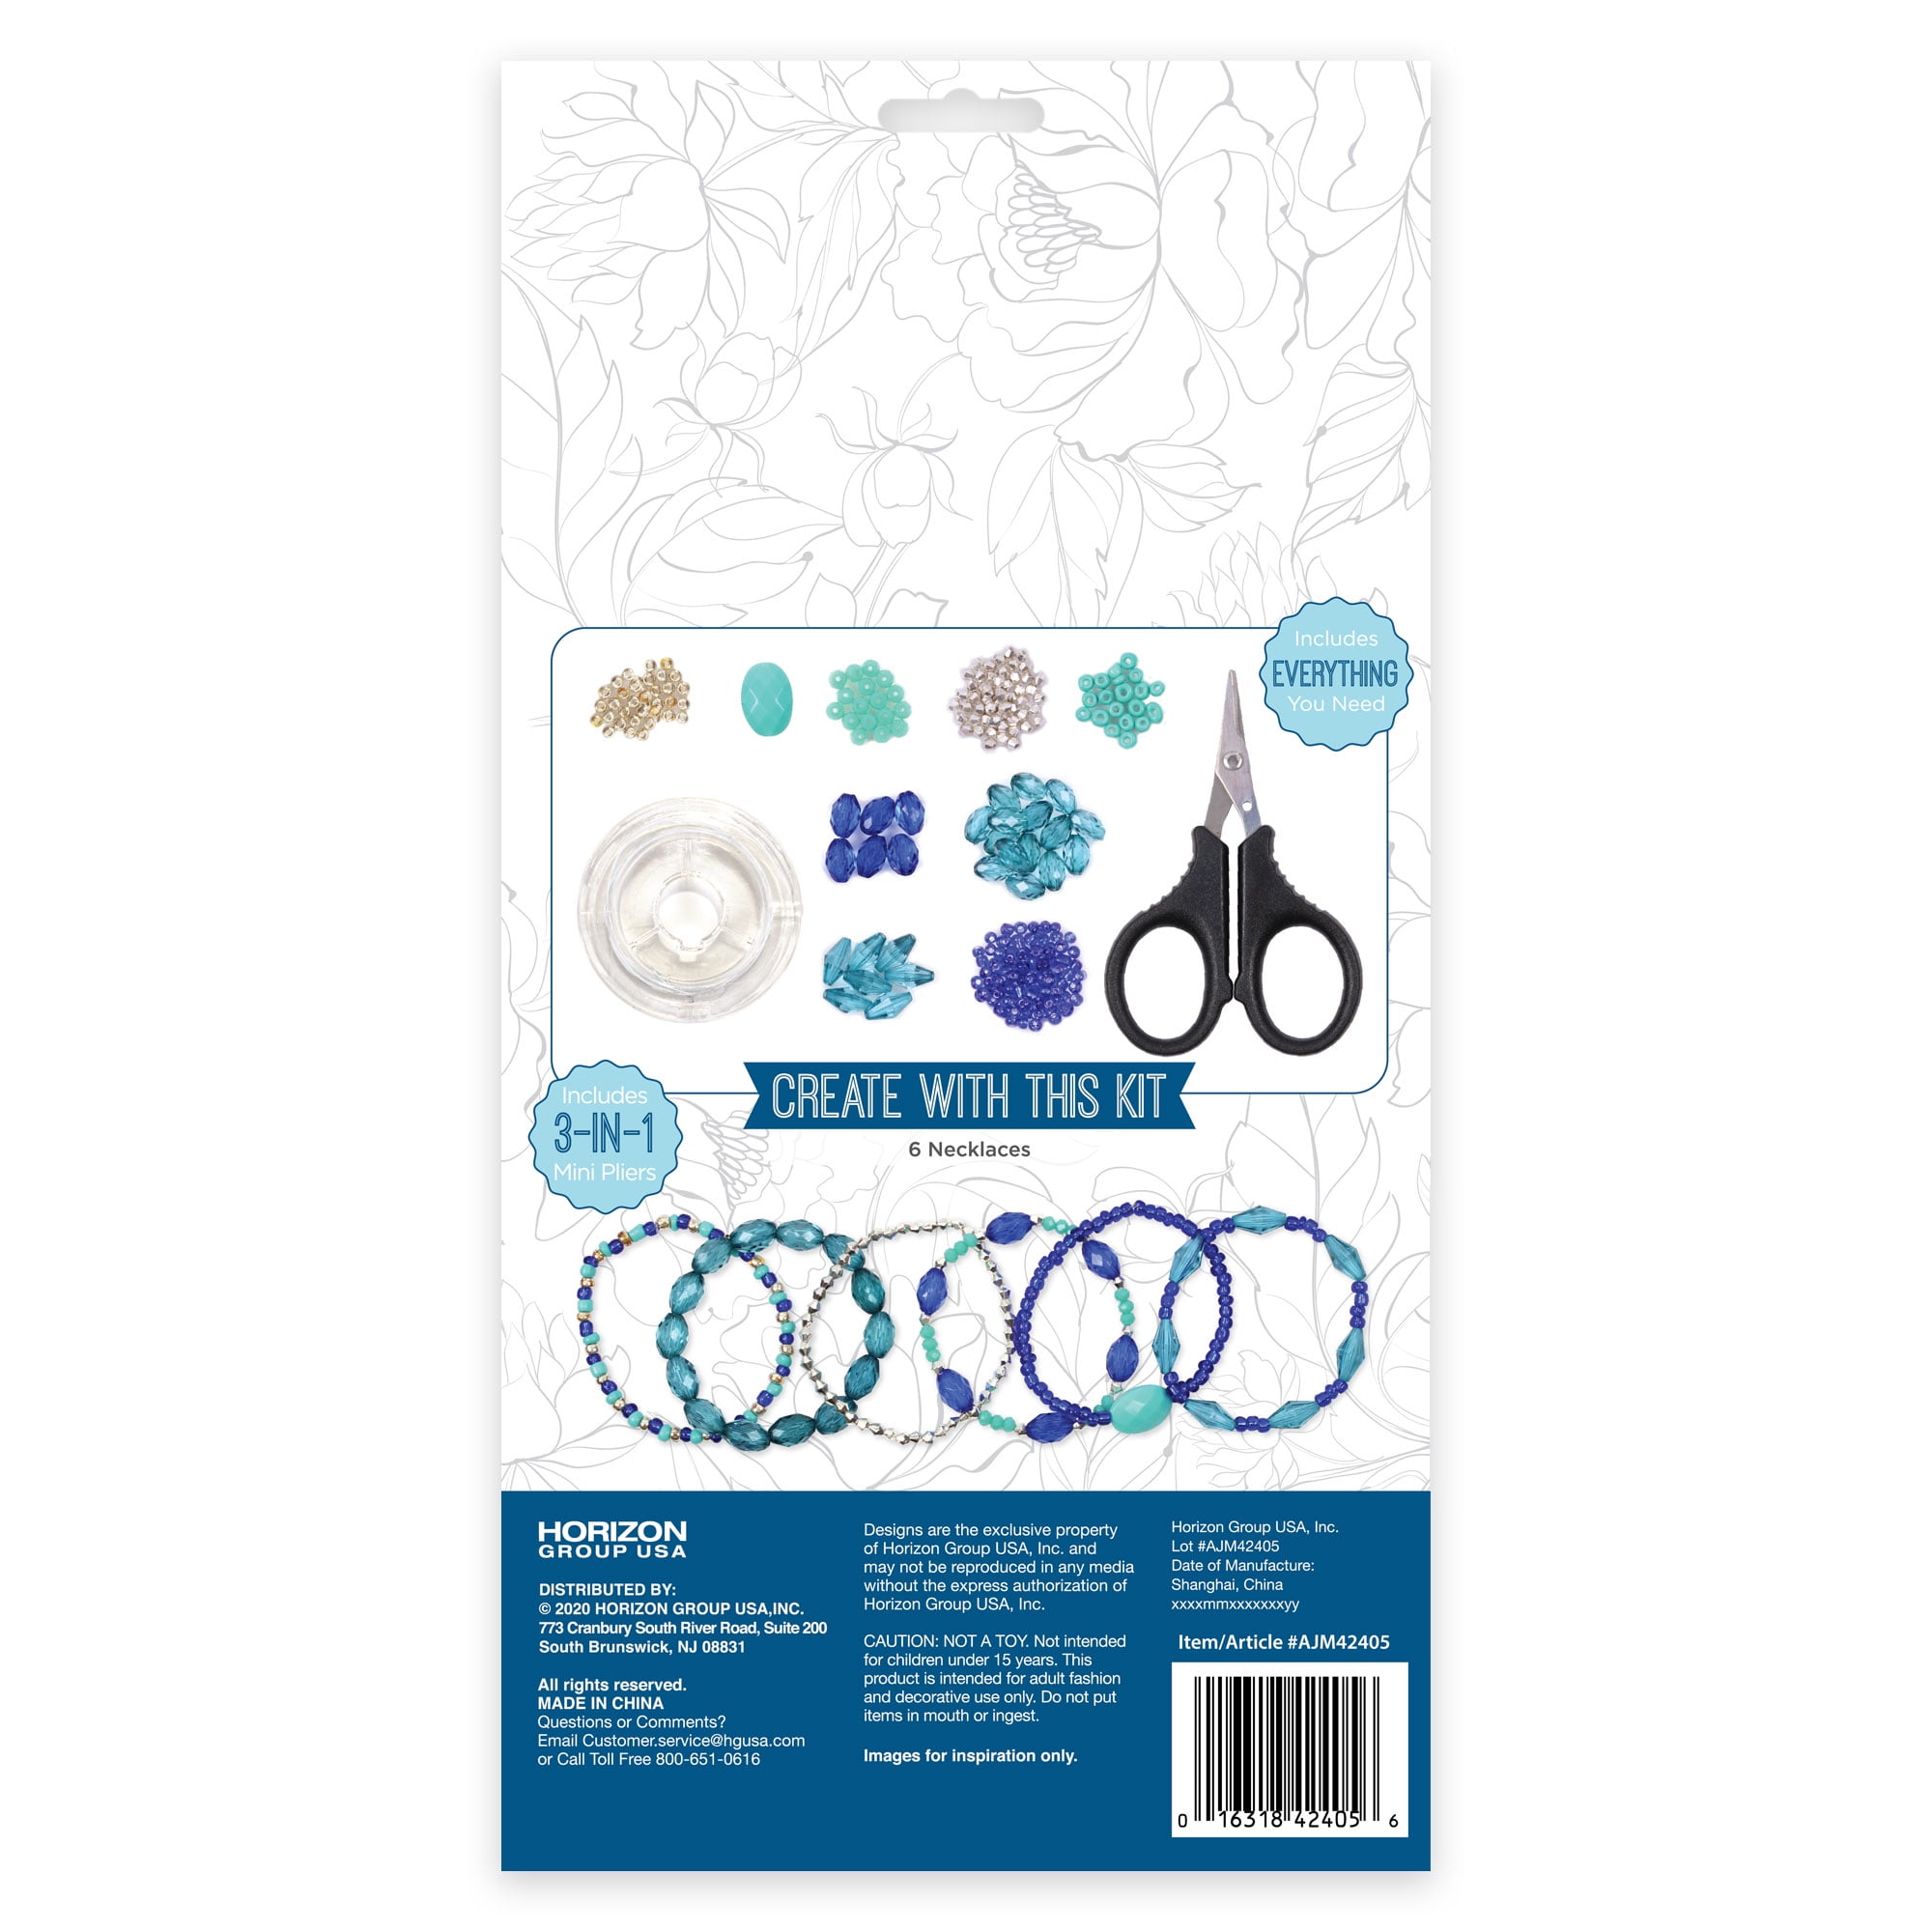 The Dreamstringer DIY Stretchy Jewelry Making Seed Bead Kit 